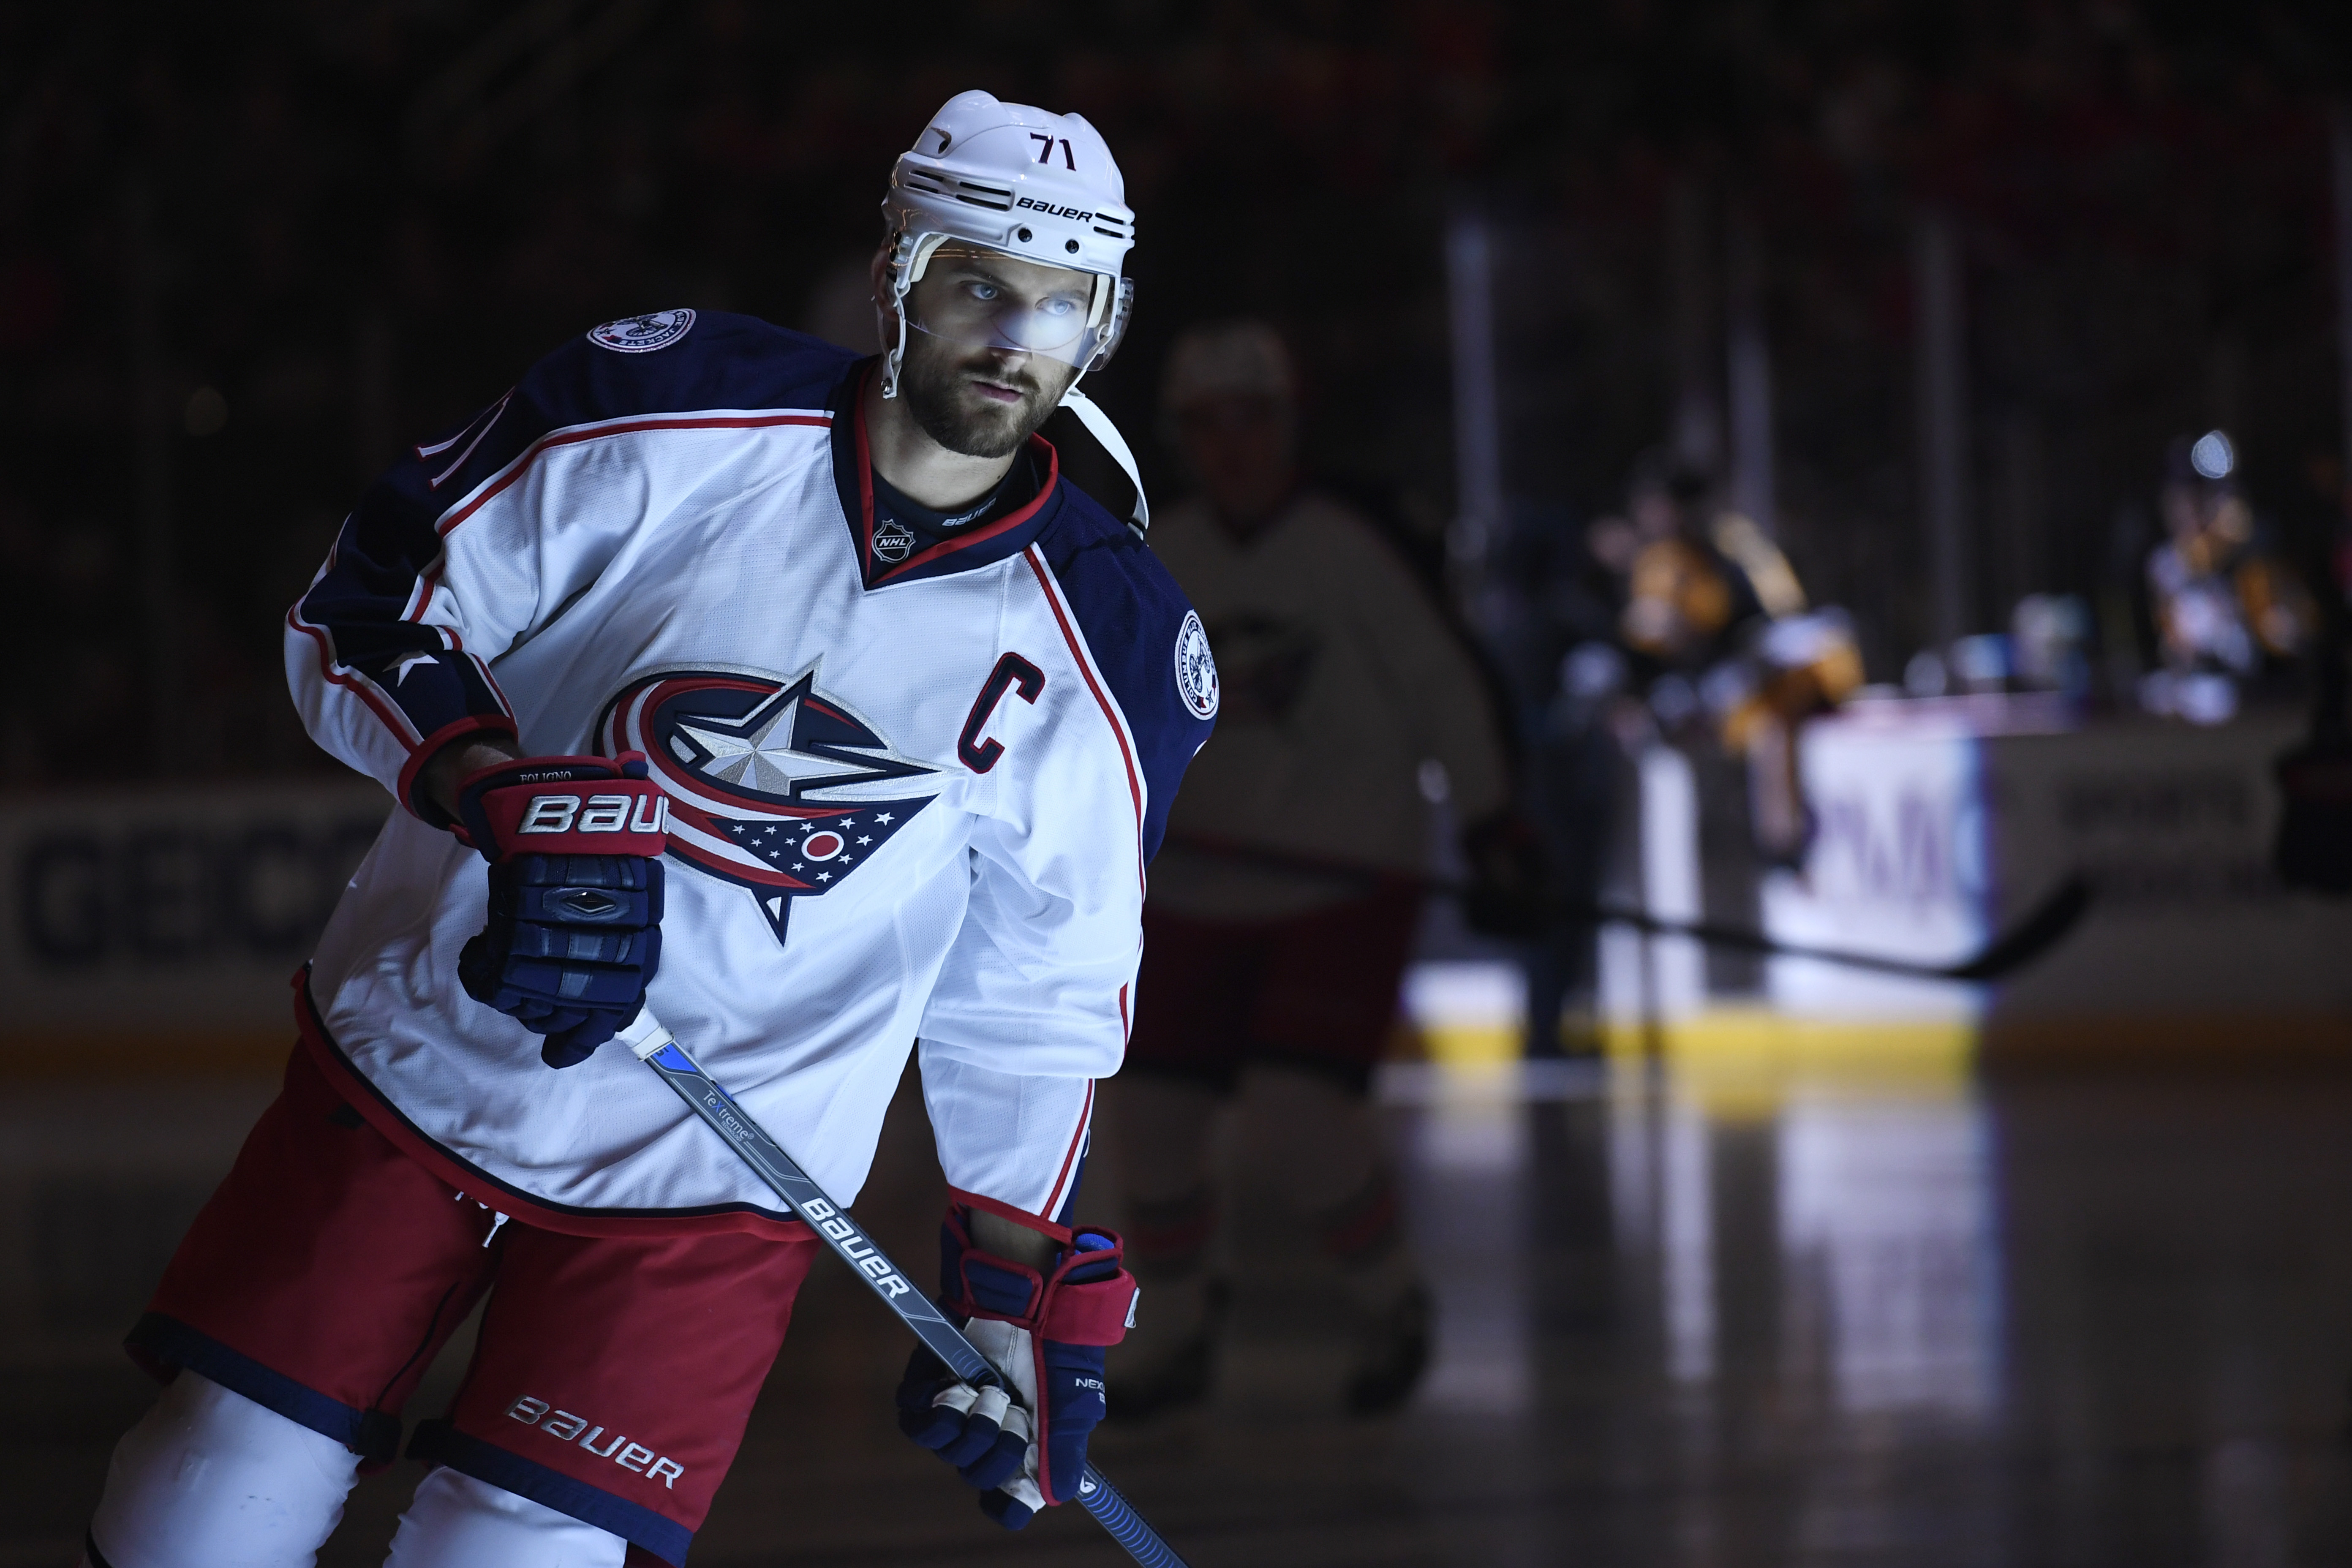 Columbus Blue Jackets How to Watch and Listen to Preseason Games